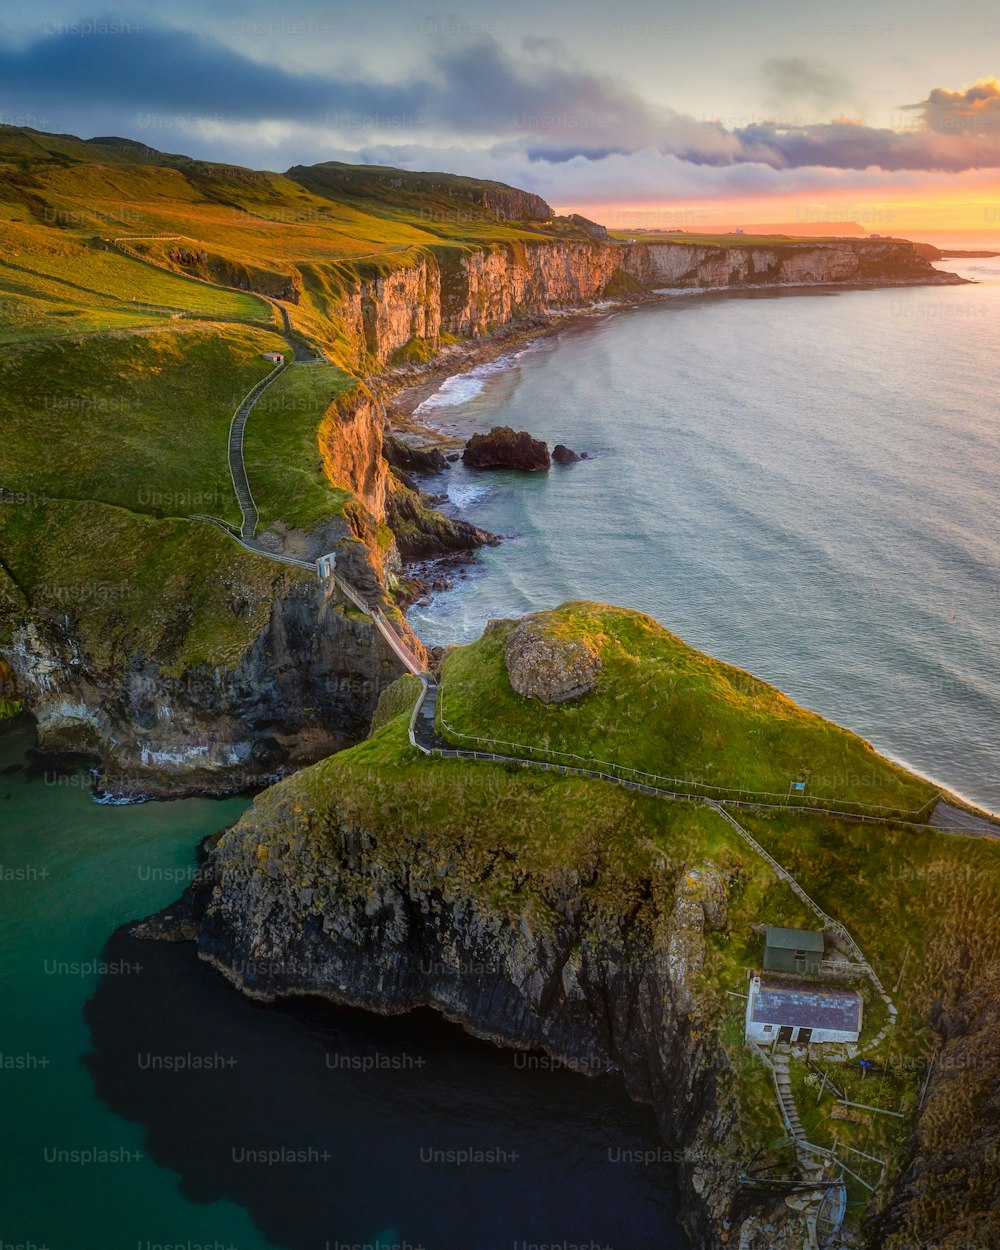 A charming view of the Carrick-a-Rede Rope Bridge at sunrise, Northern Ireland